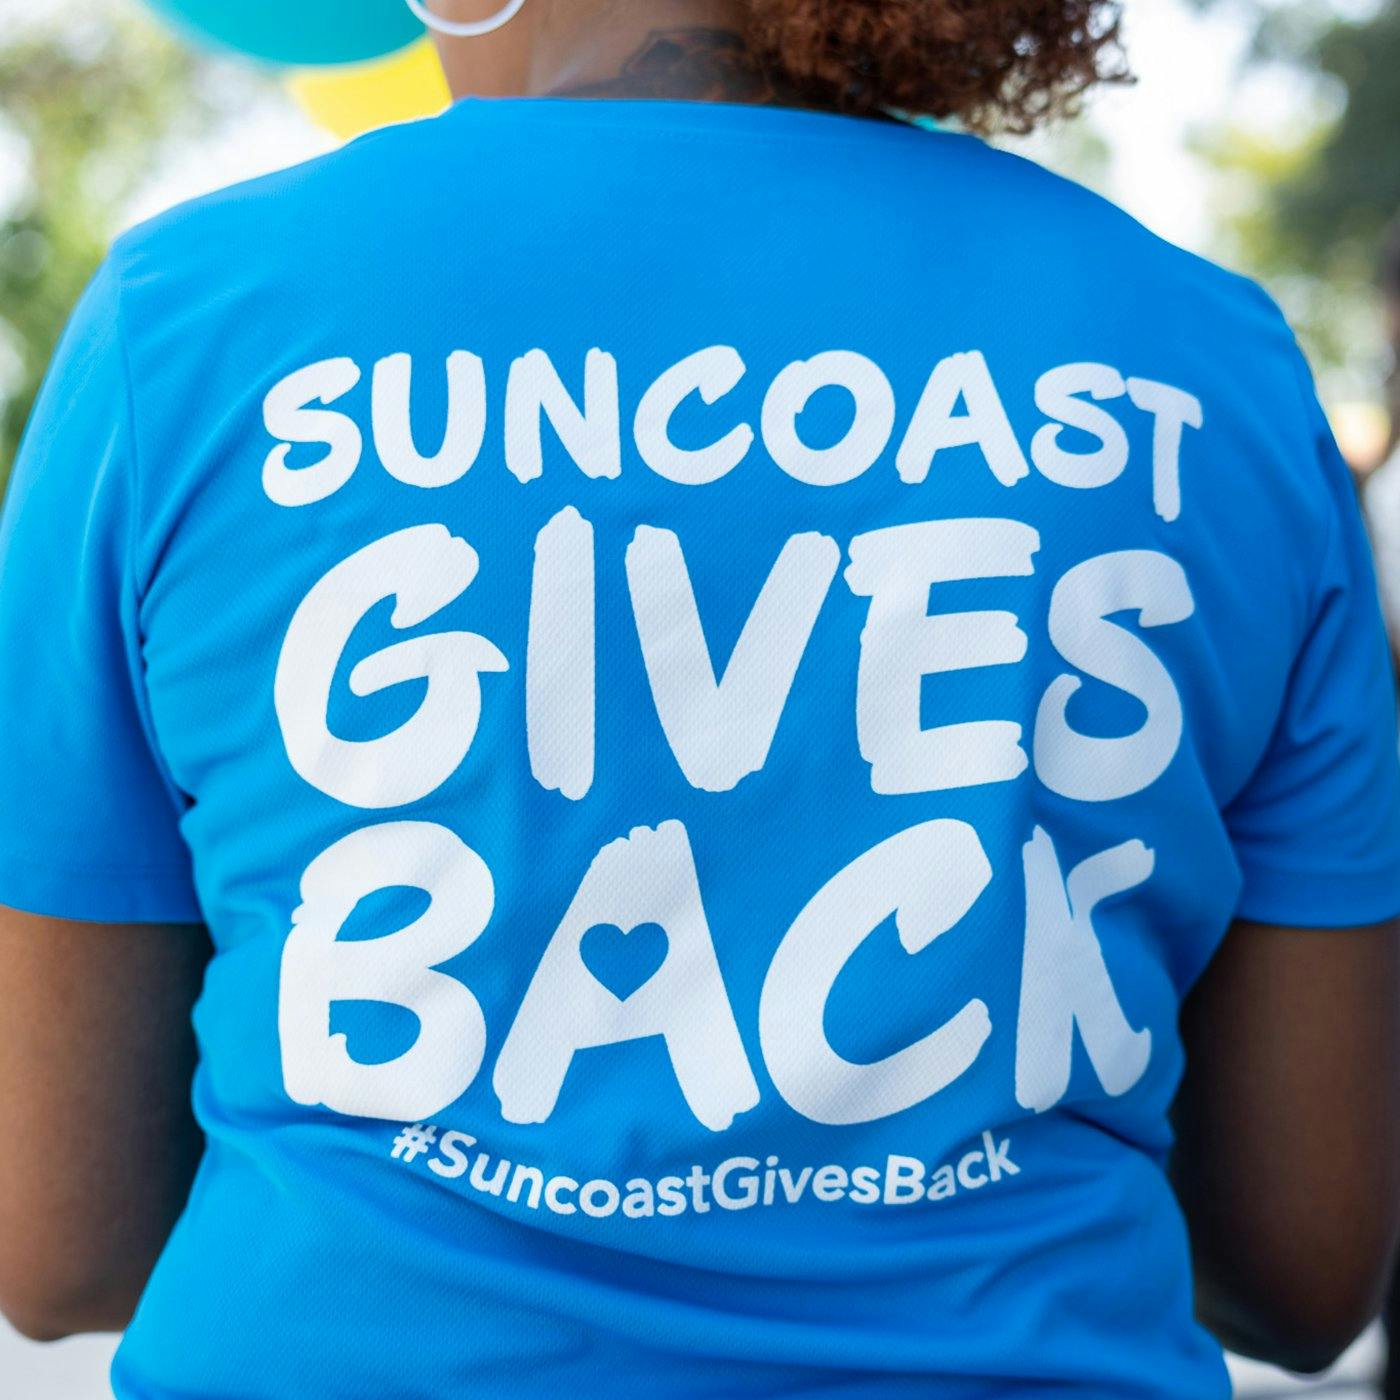 The back of a shirt that has Suncoast Gives Back printed on it